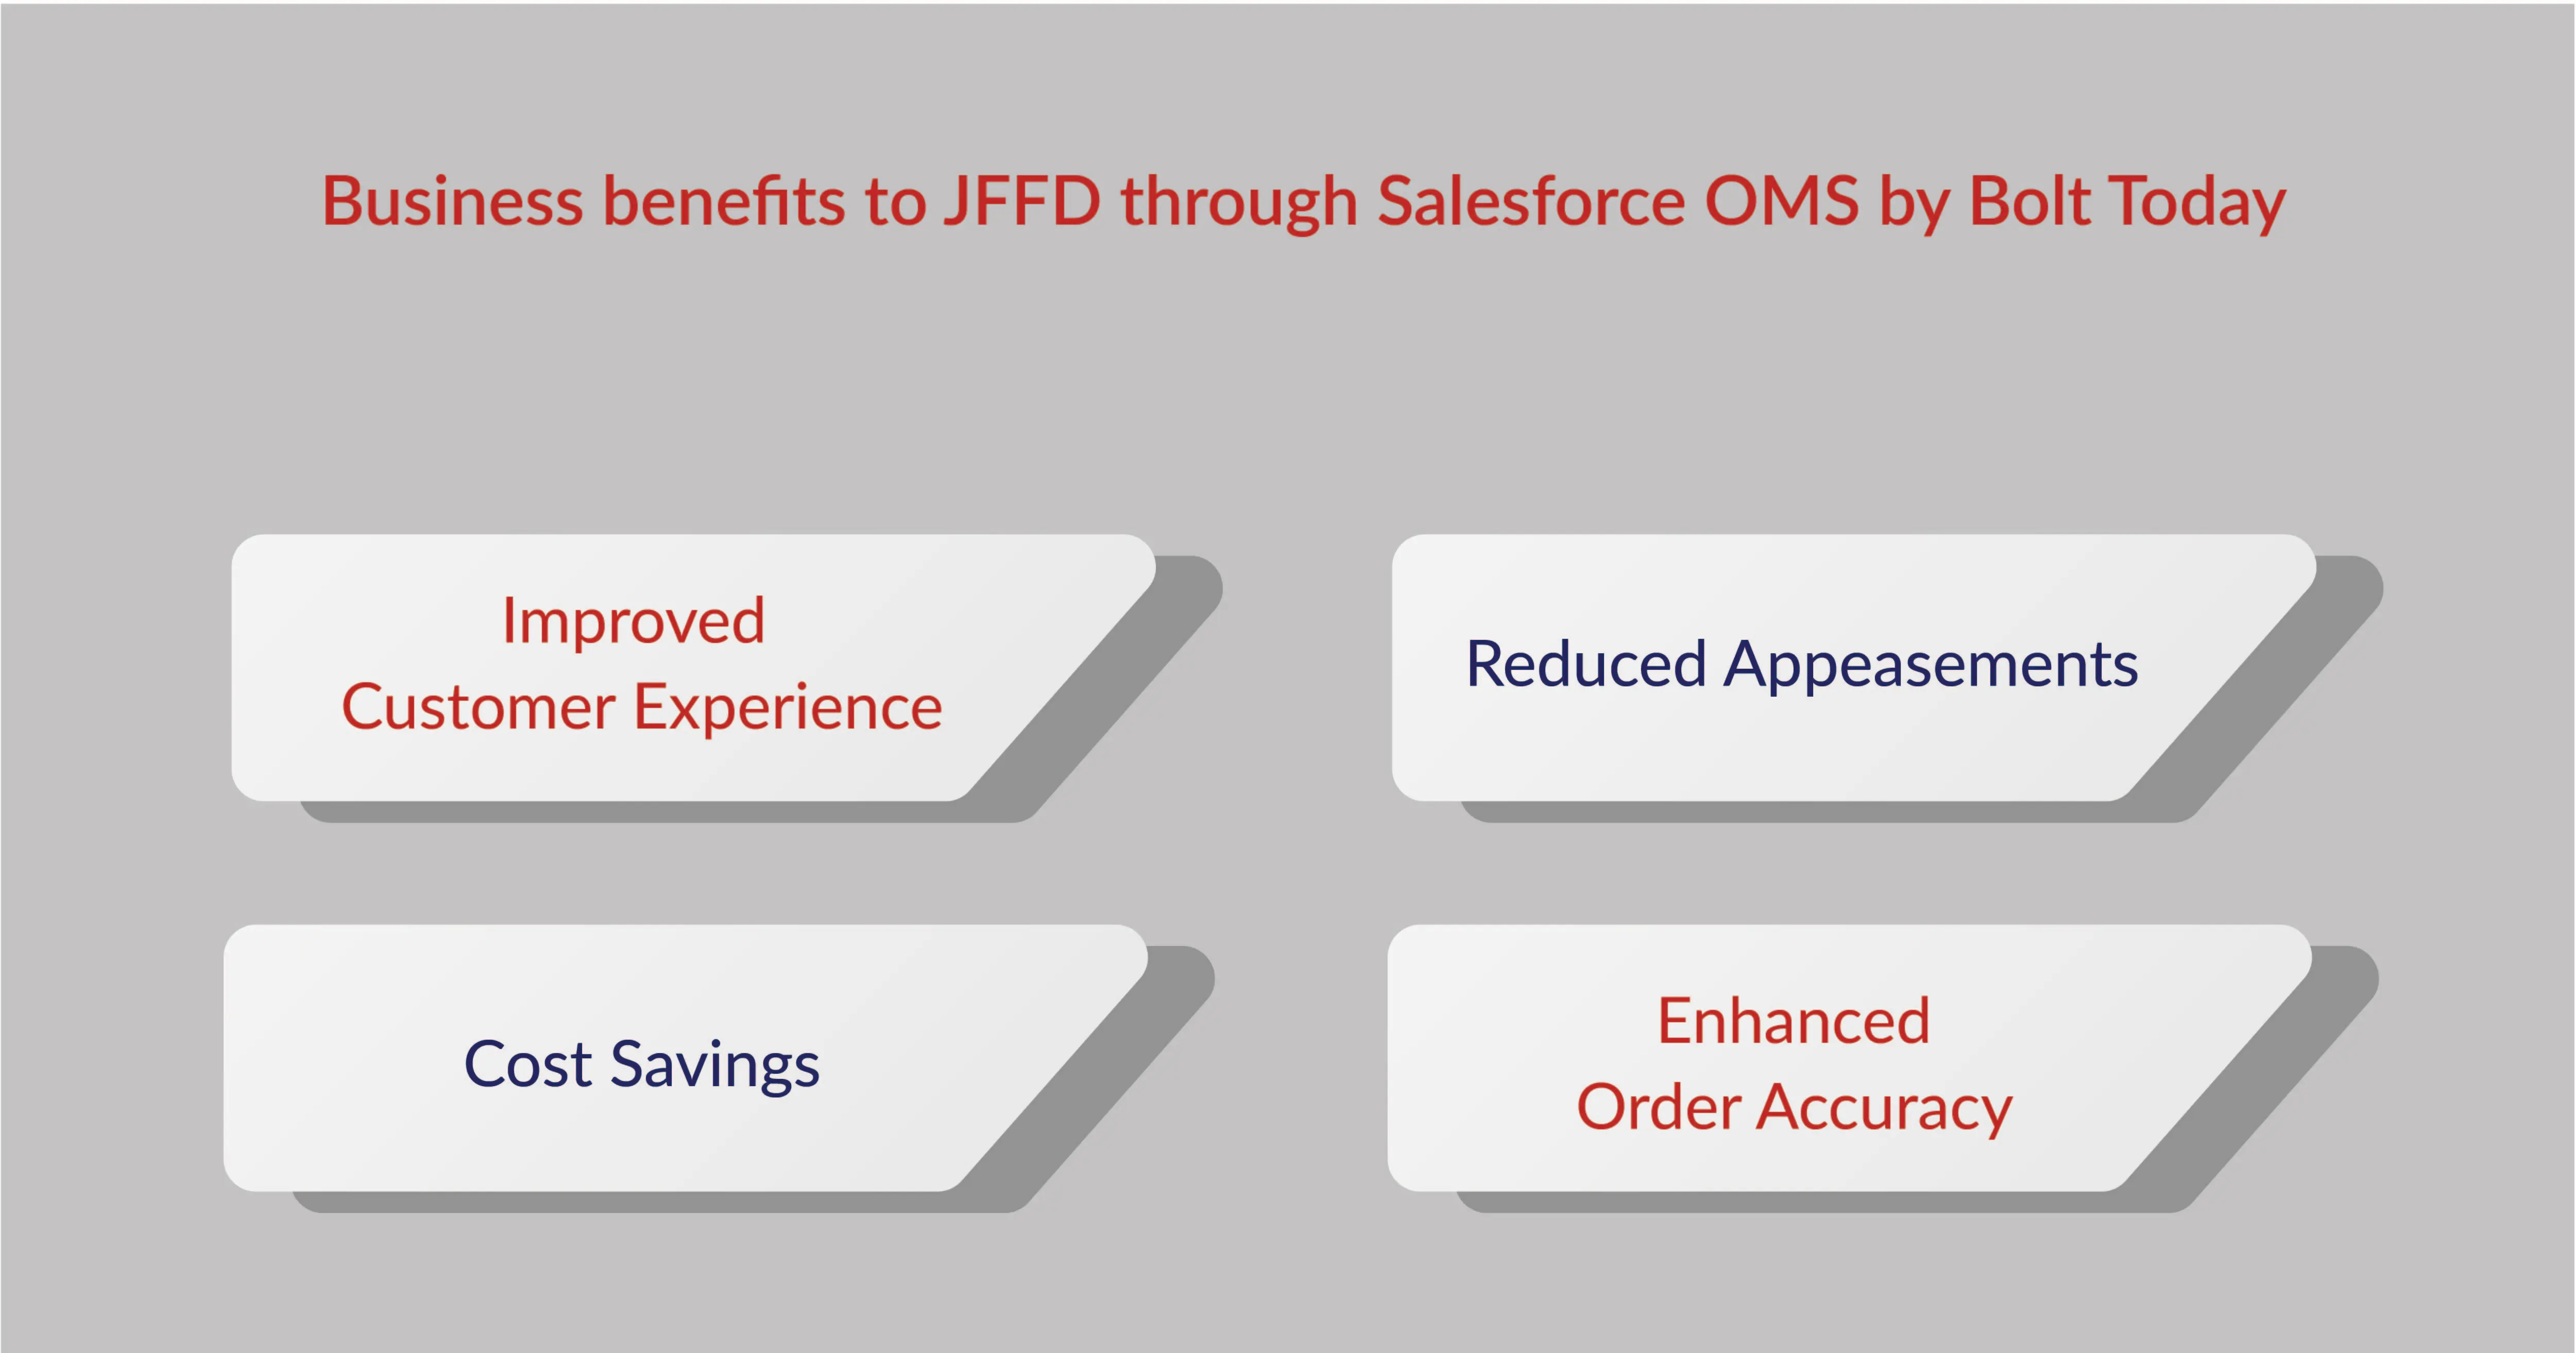 Business benefits to JFFD through Salesforce OMS by Bolt Today